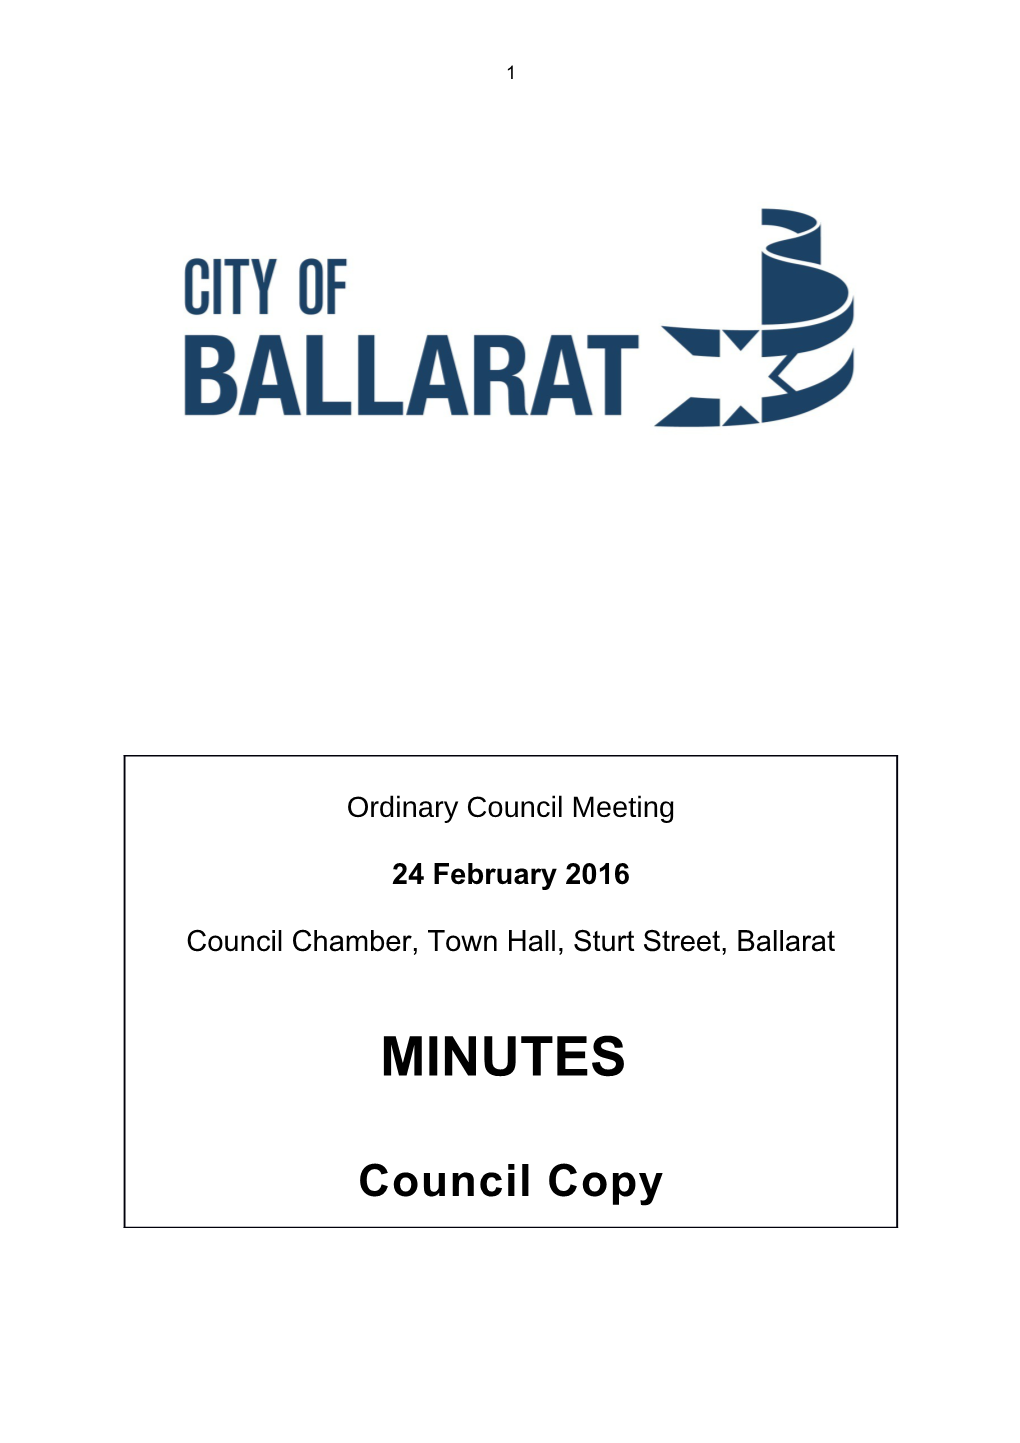 Pro-Forma Minutes of Council Meeting - 24 February 2016 s1